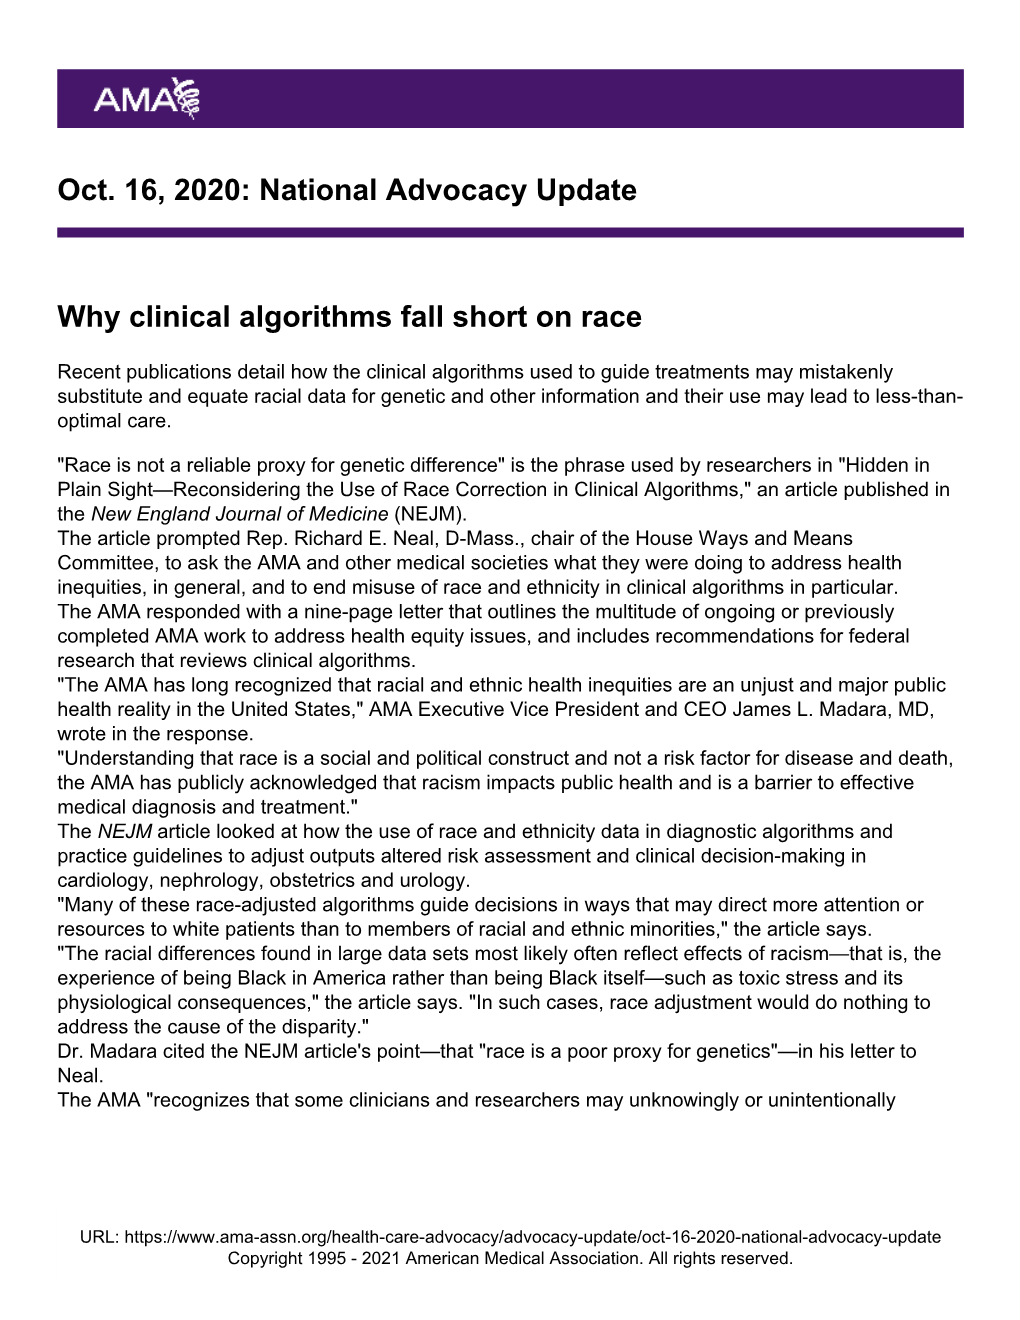 National Advocacy Update Why Clinical Algorithms Fall Short on Race